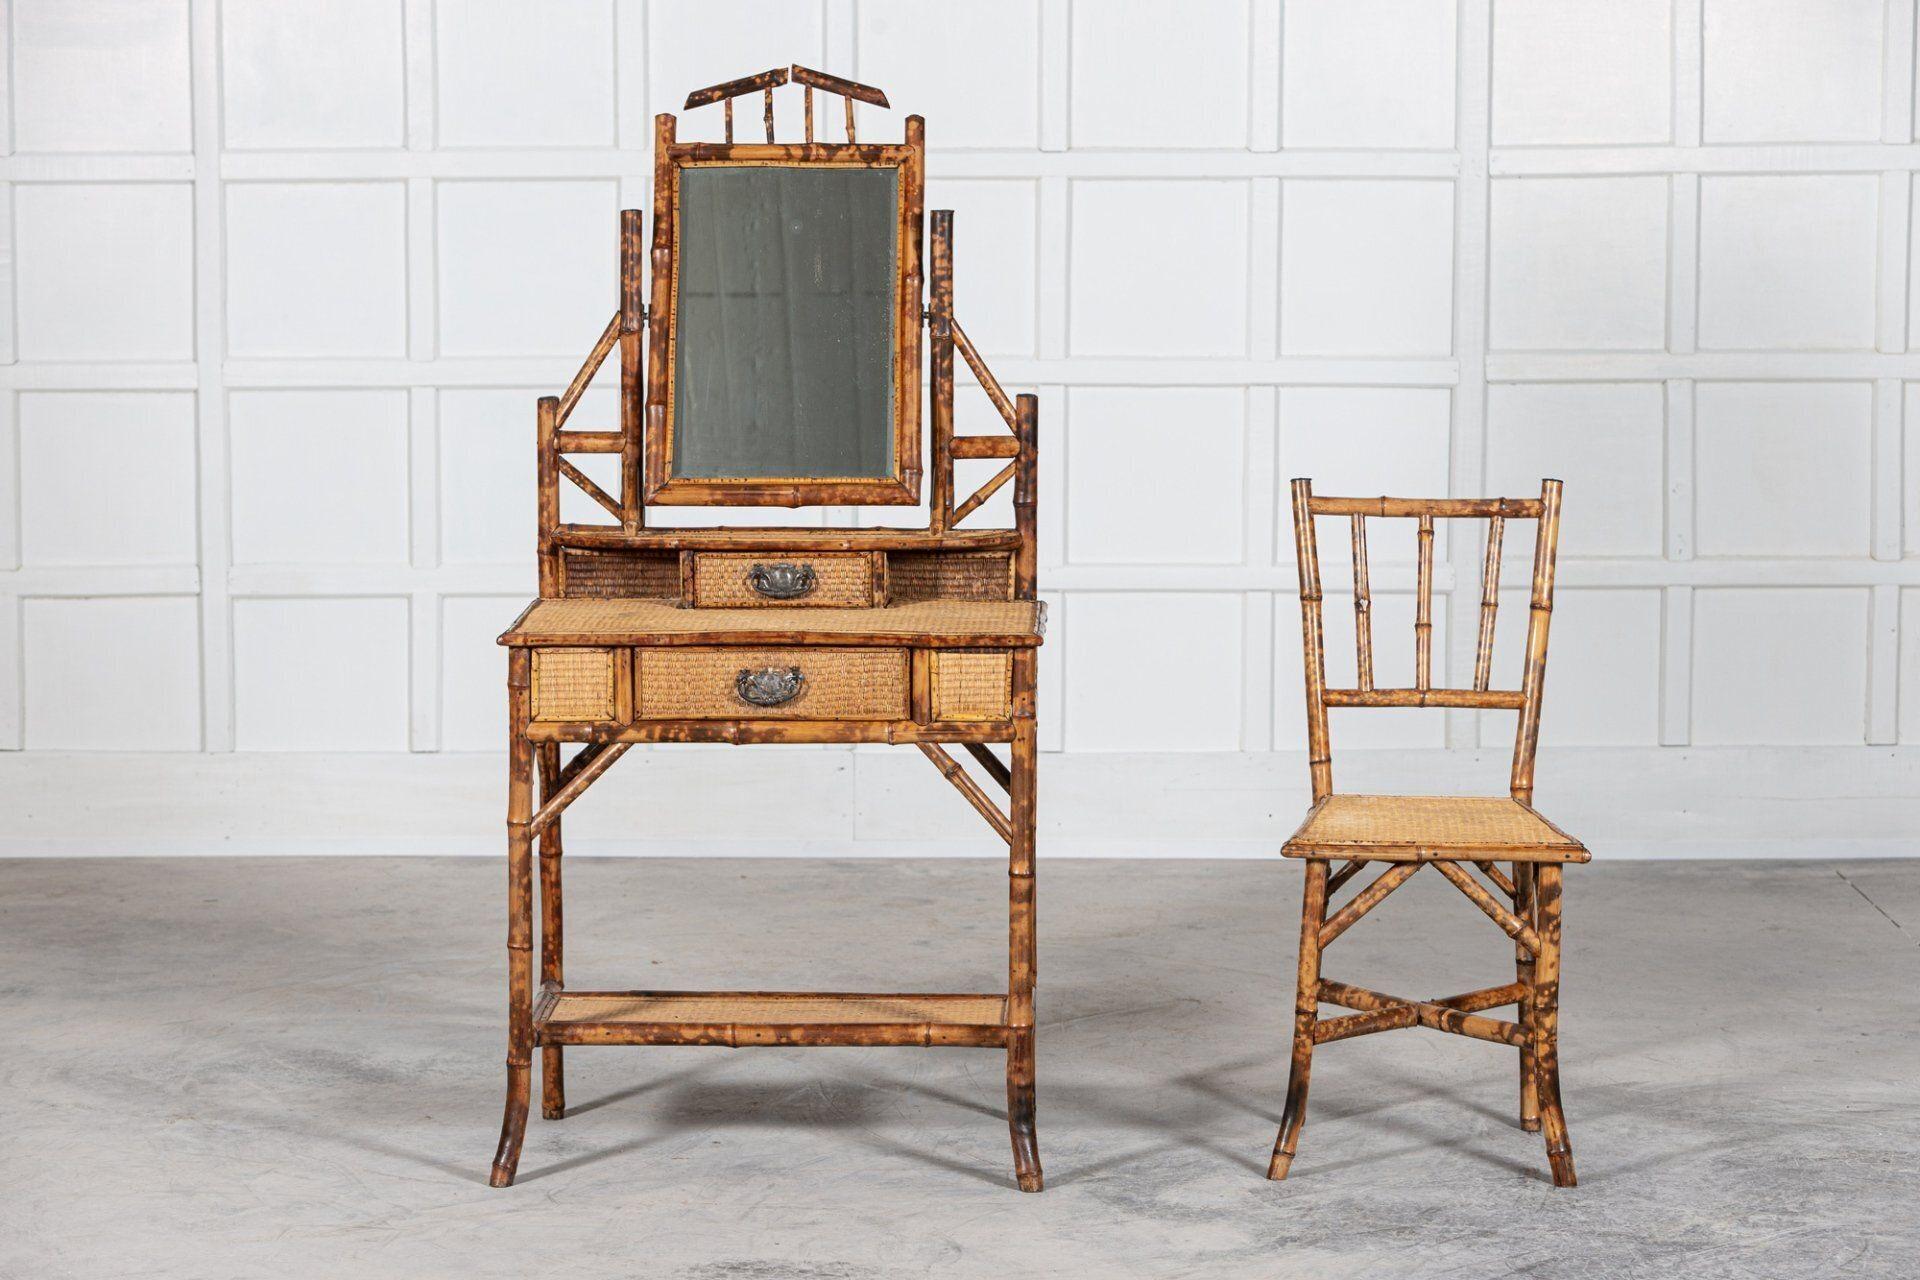 Circa 1860
19thC English Tiger Bamboo dressing table & matching chair
sold as a set
Sku 1139
Dressing table
W75 x D44 x H156cm
Chair
W43 x D41 x H93cm
seat height 49cm.